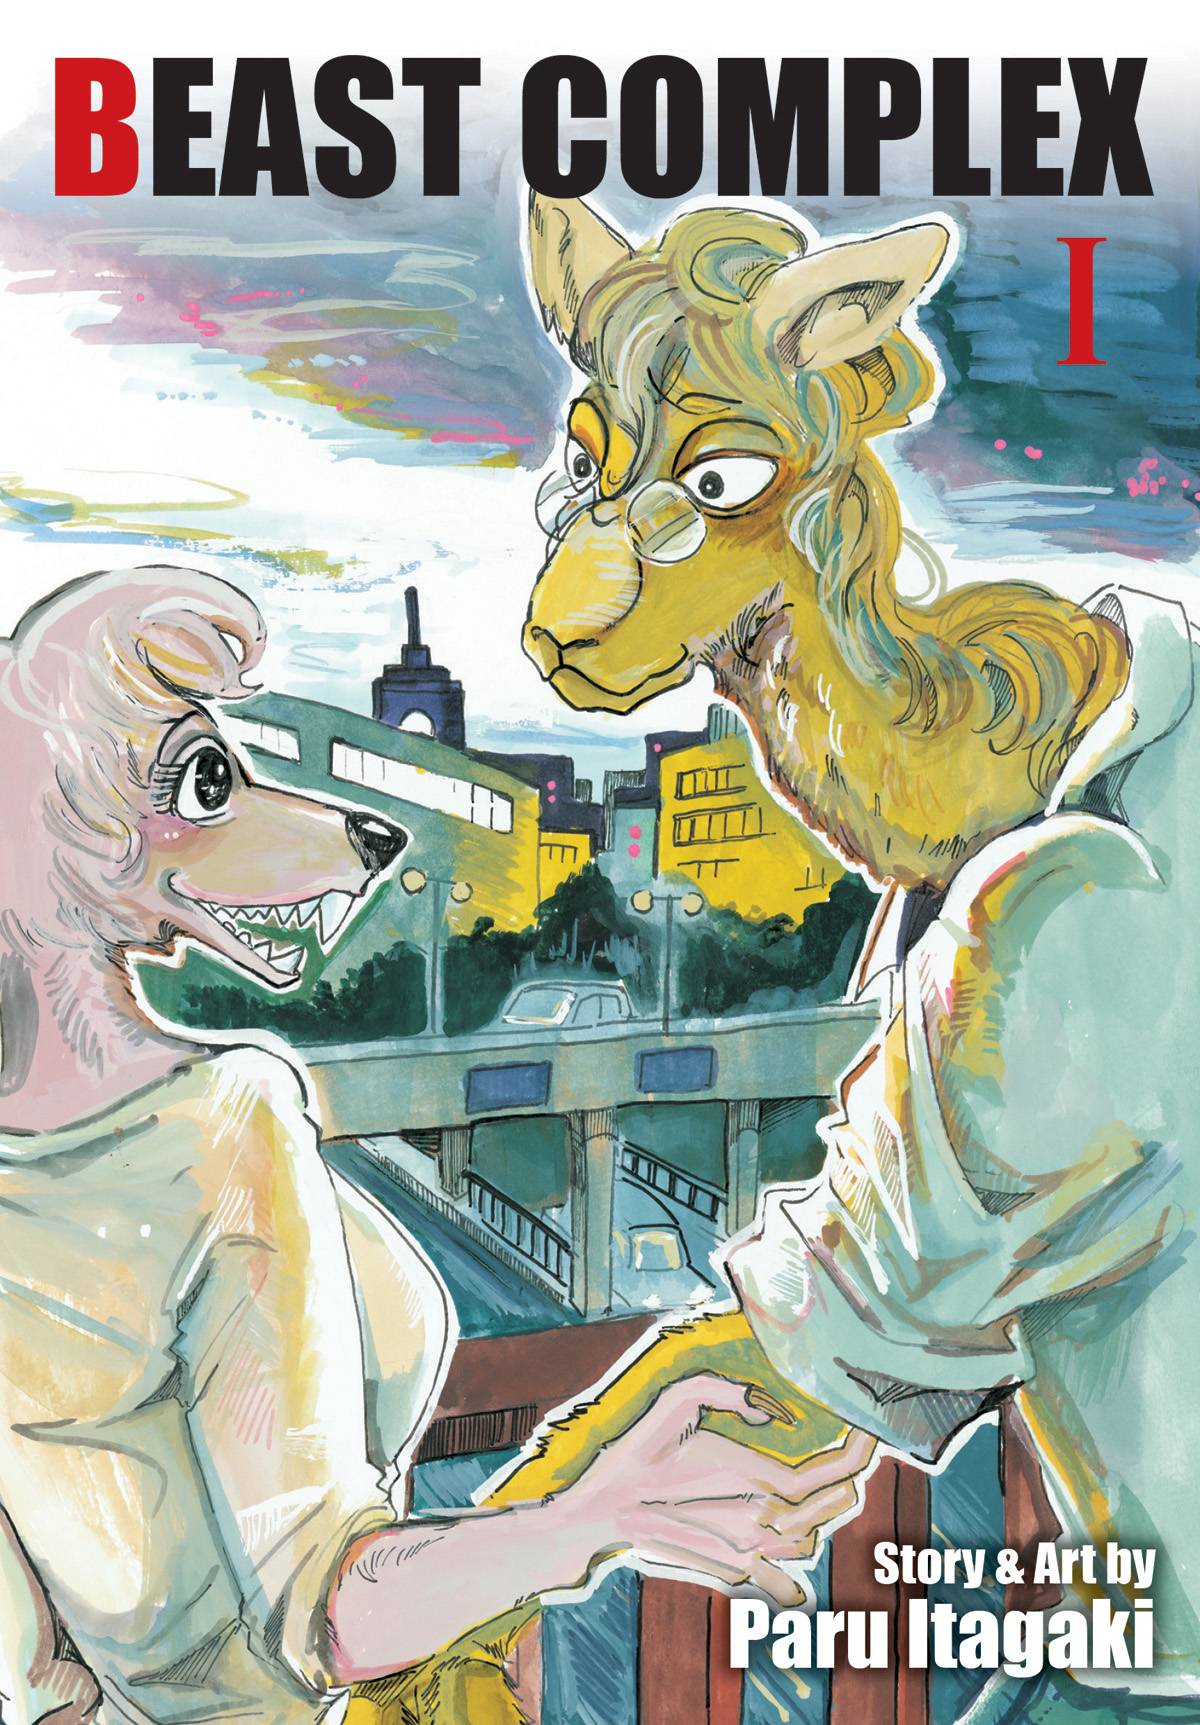 A light pink anthropomorphised wolf wearing a shirt smiles as she cups the elbow of an anthopomorphised camel wearing a shirt and glasses. Behind them is a city with a smoggy sky.